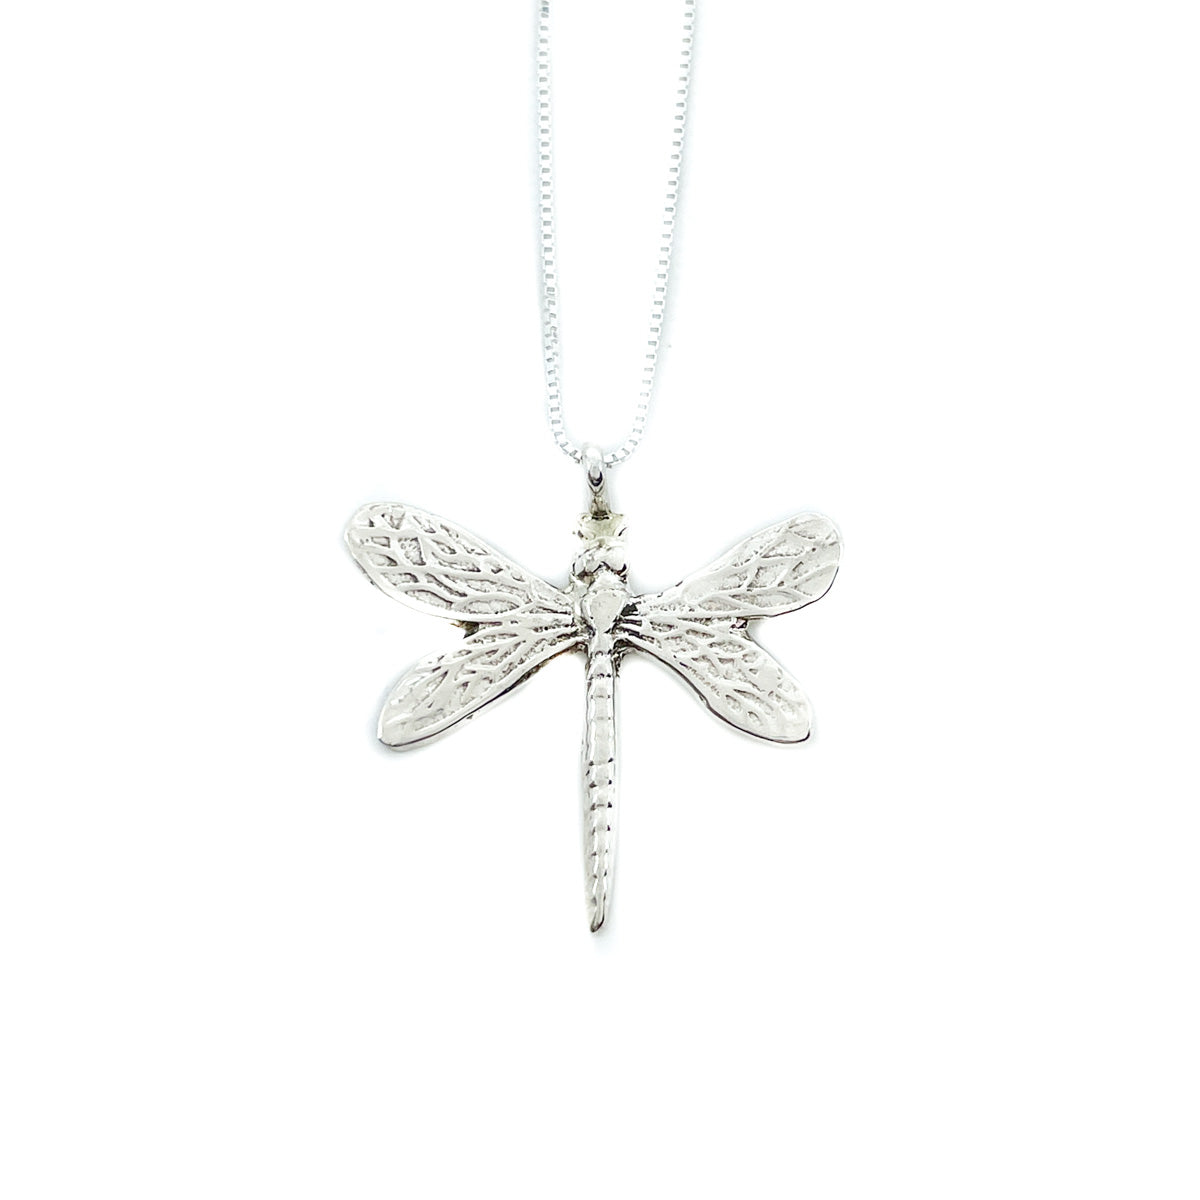 Sterling silver dragonfly pendant with sterling silver chain Pendant measures approx. 1.25 inches long with 1.25 inch wide wingspan 18 inch chain with spring ring clasp